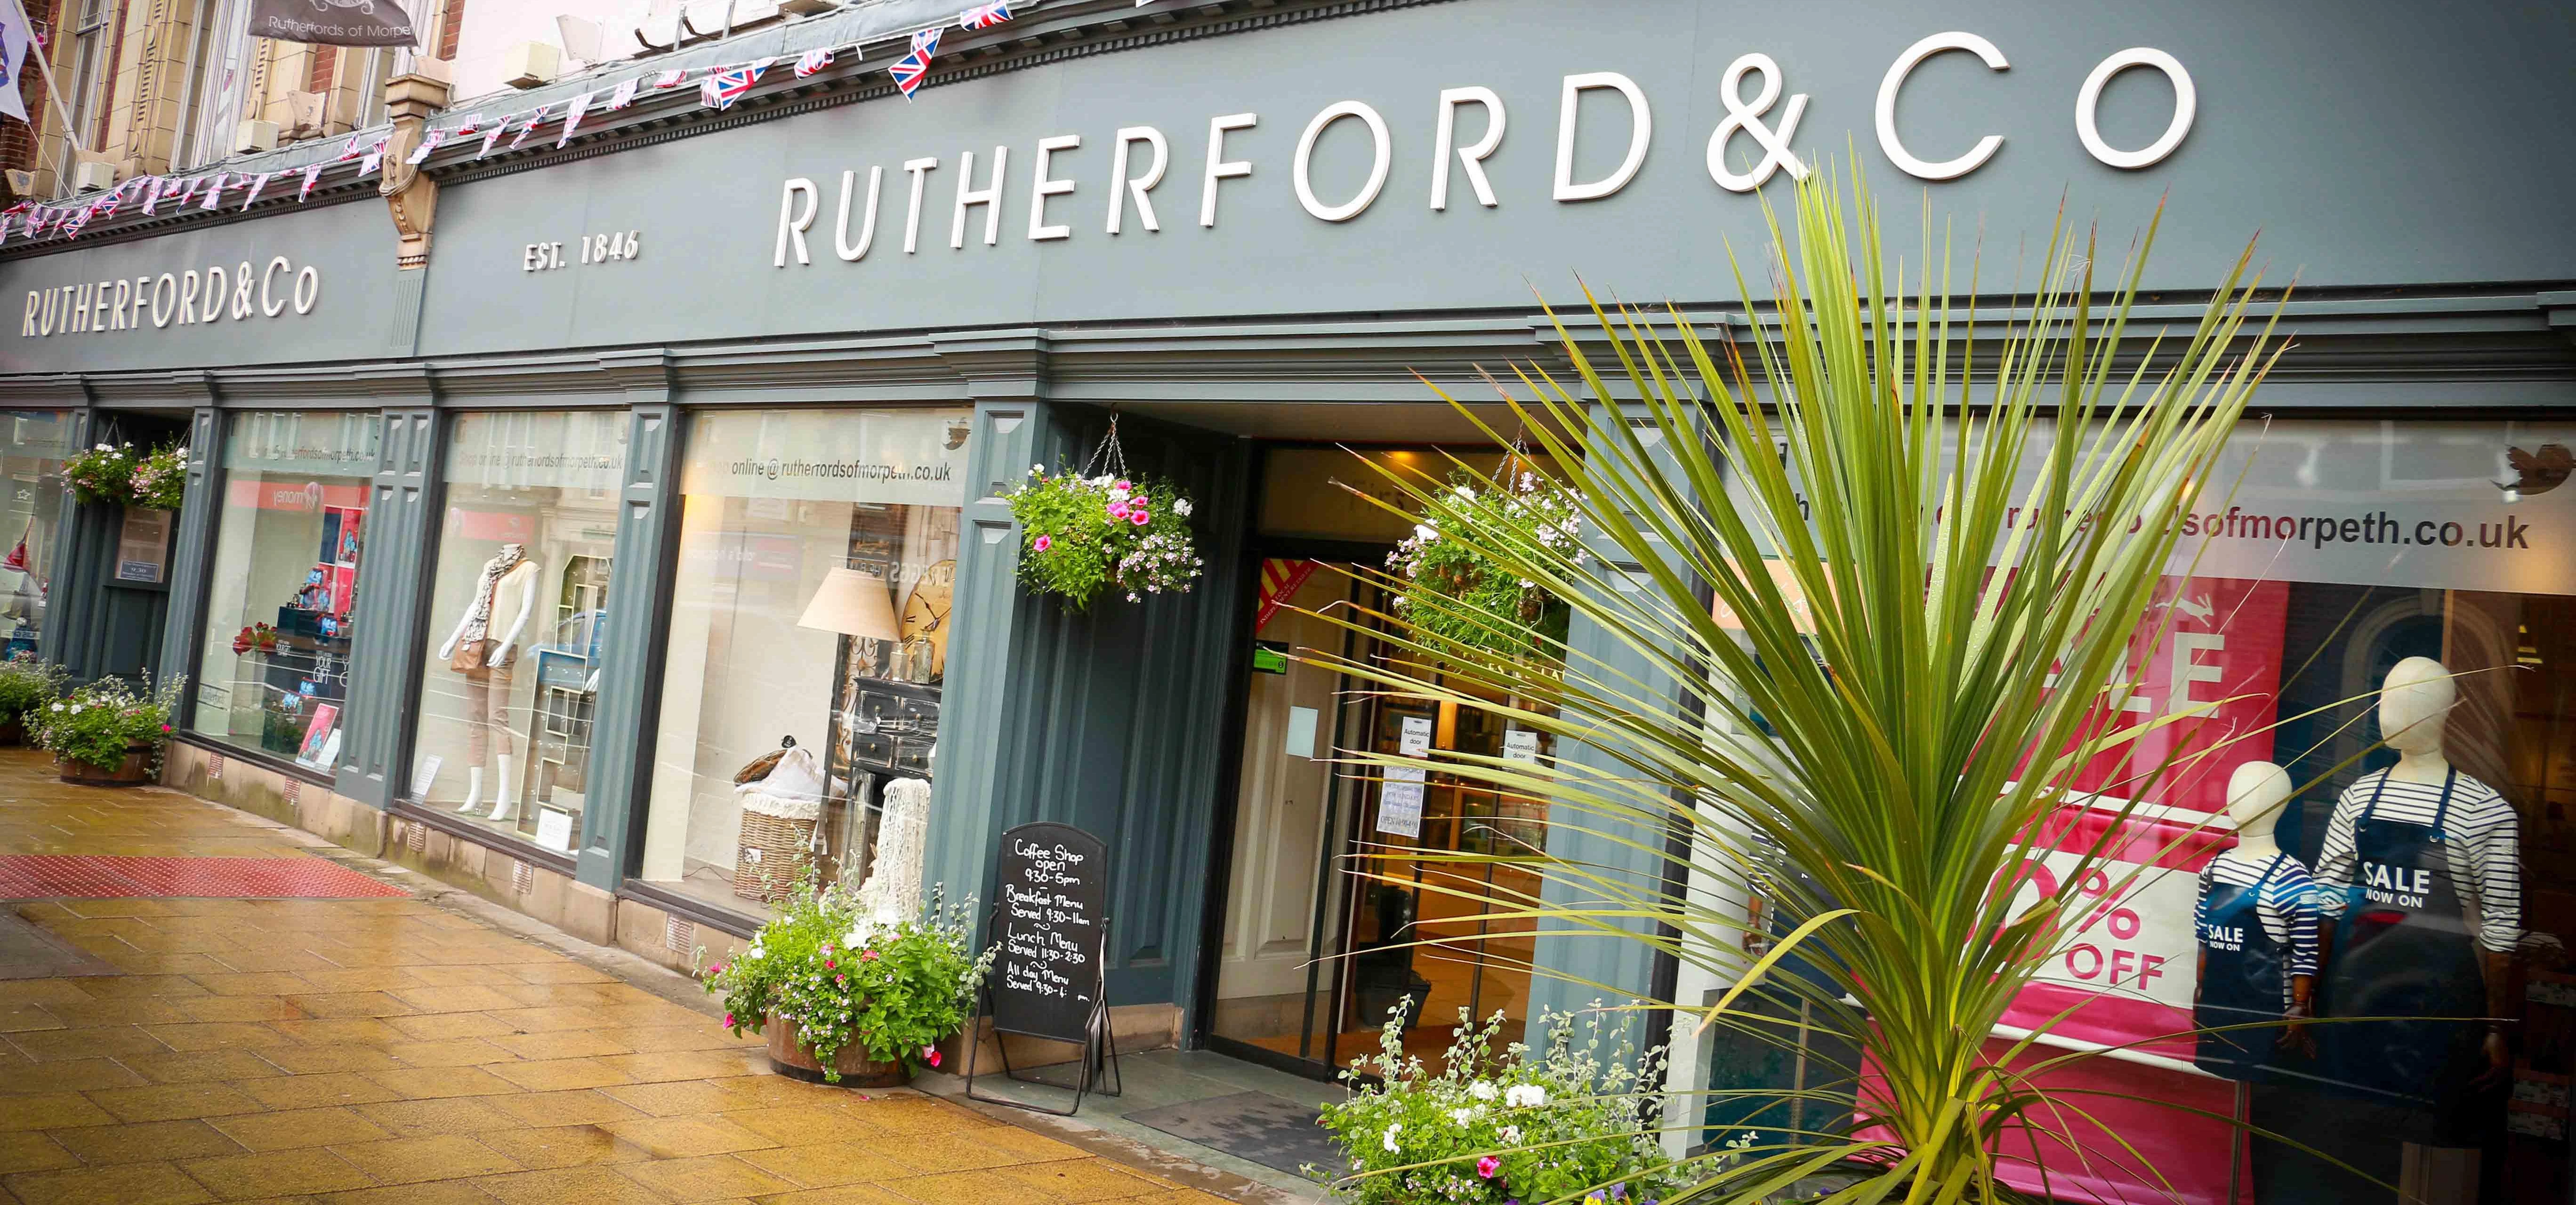 Rutherfords of Morpeth department store undergoes £50K revamp